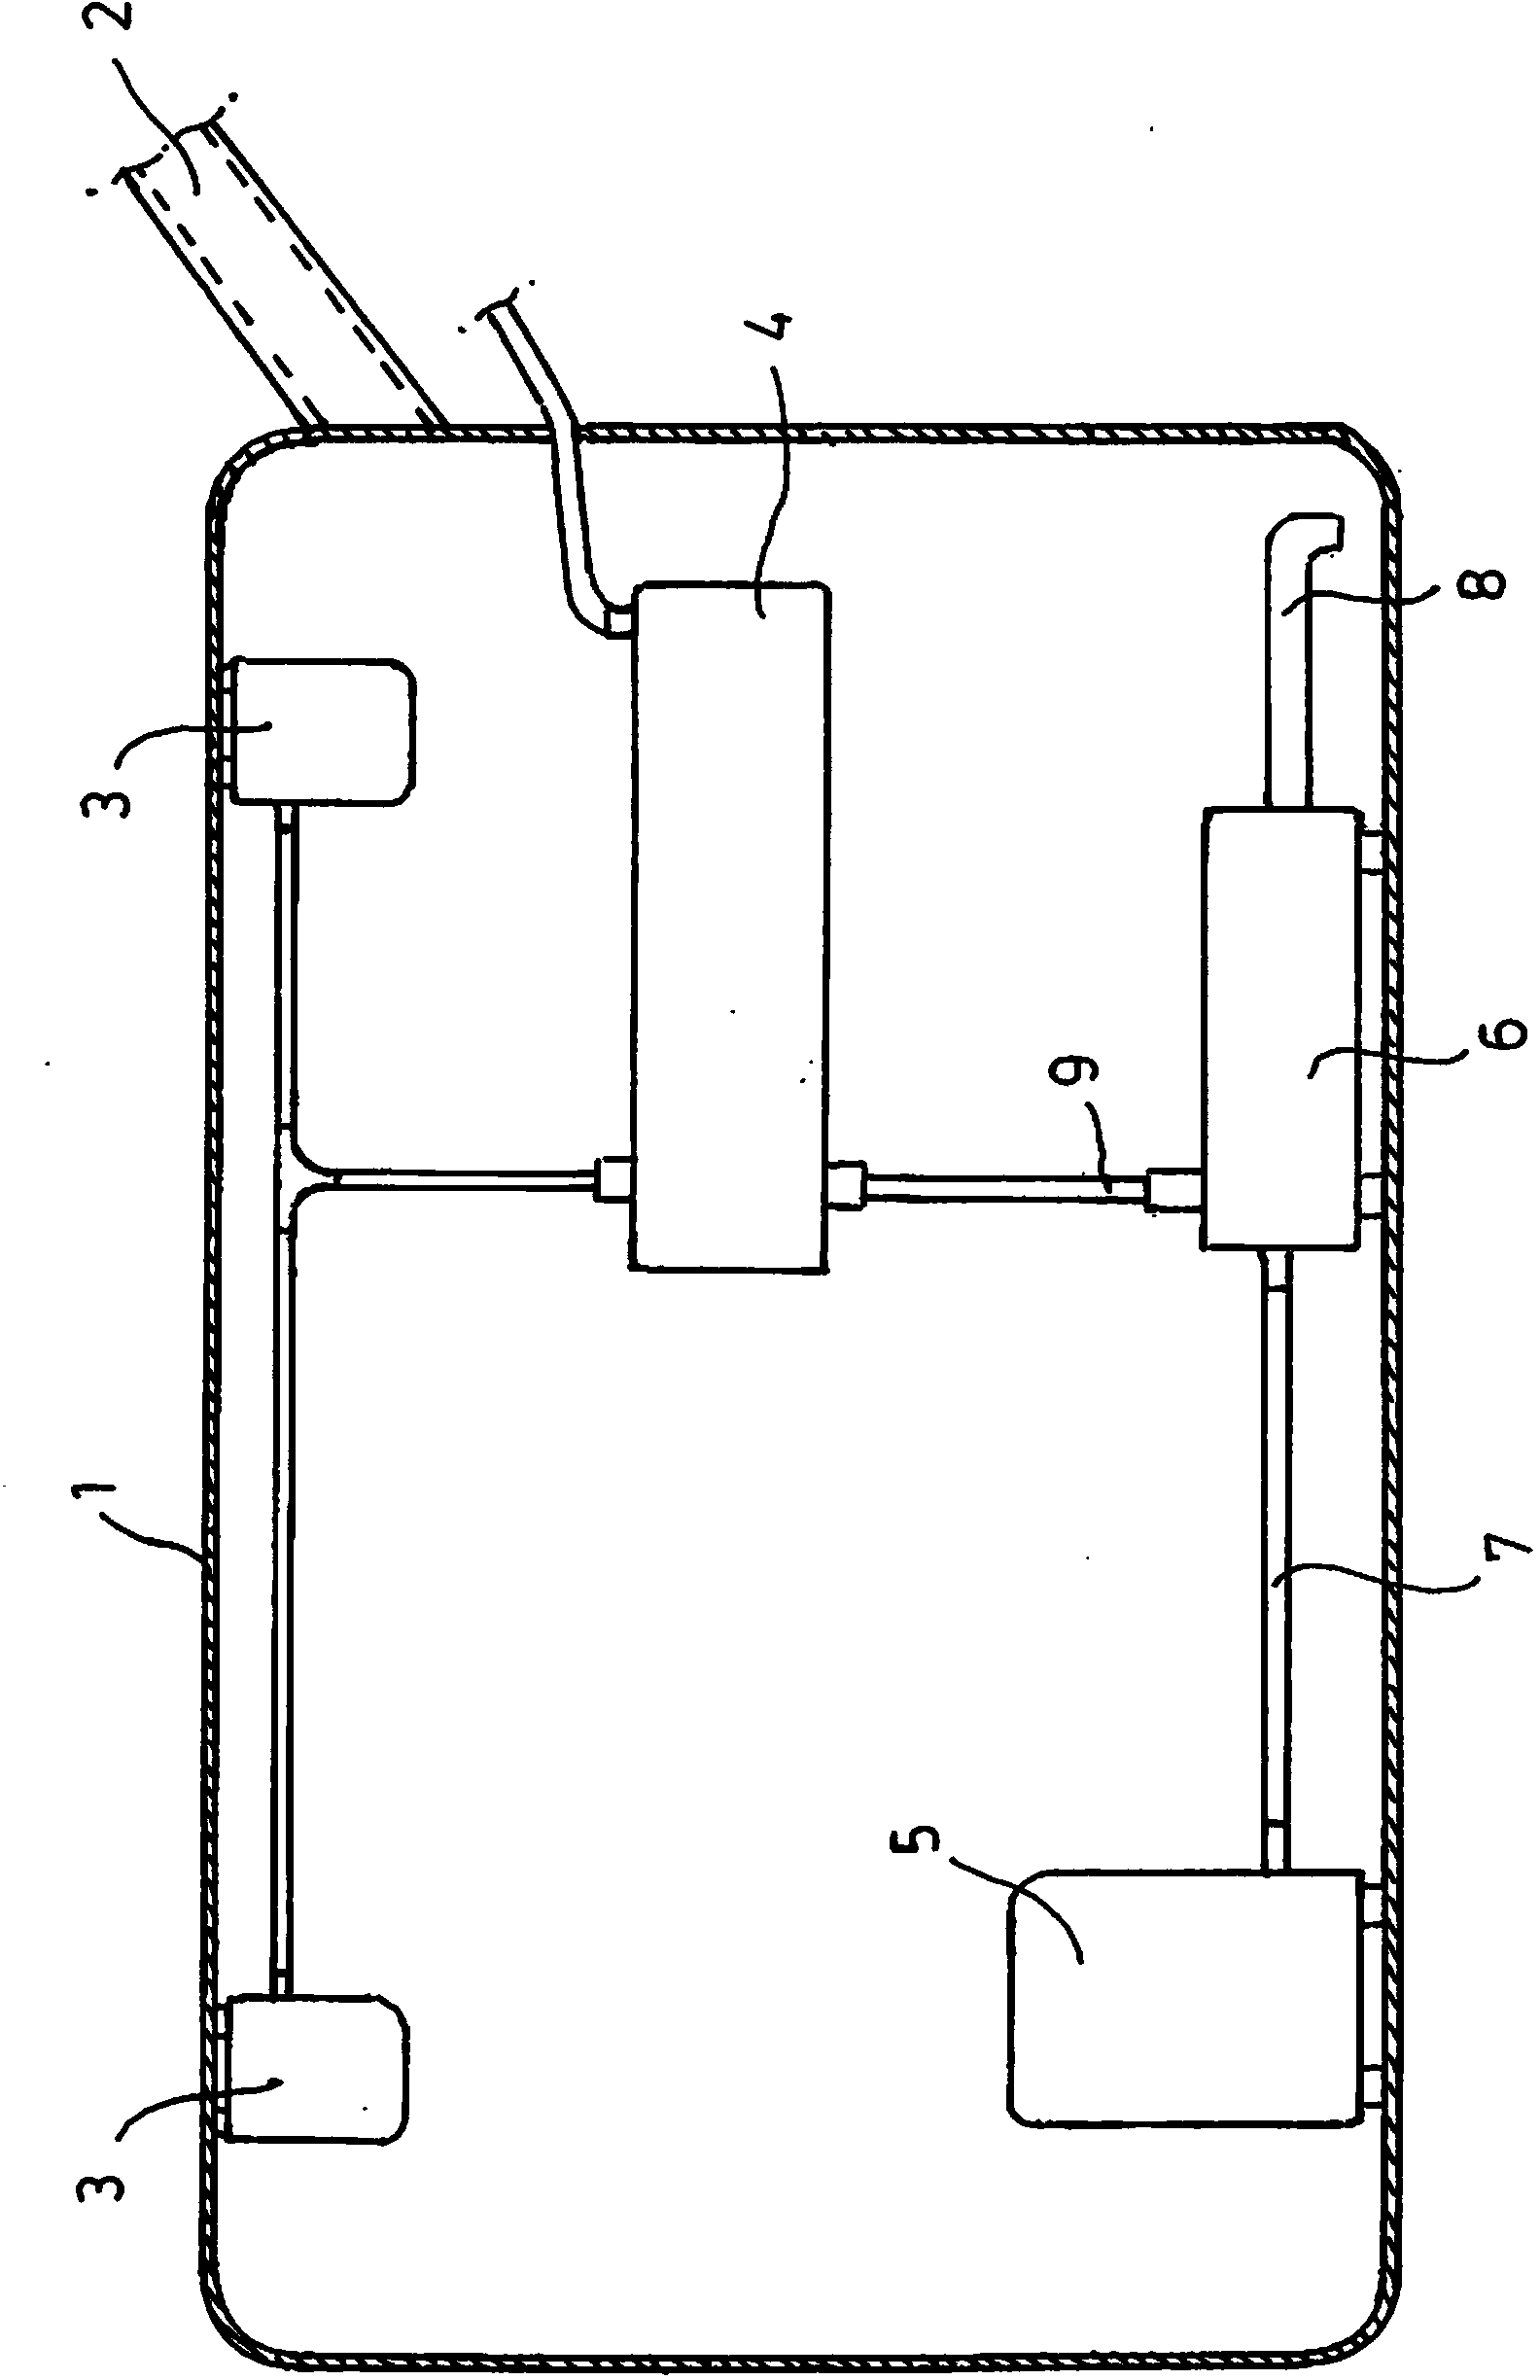 Device for pressure-dependent opening of a suction intake